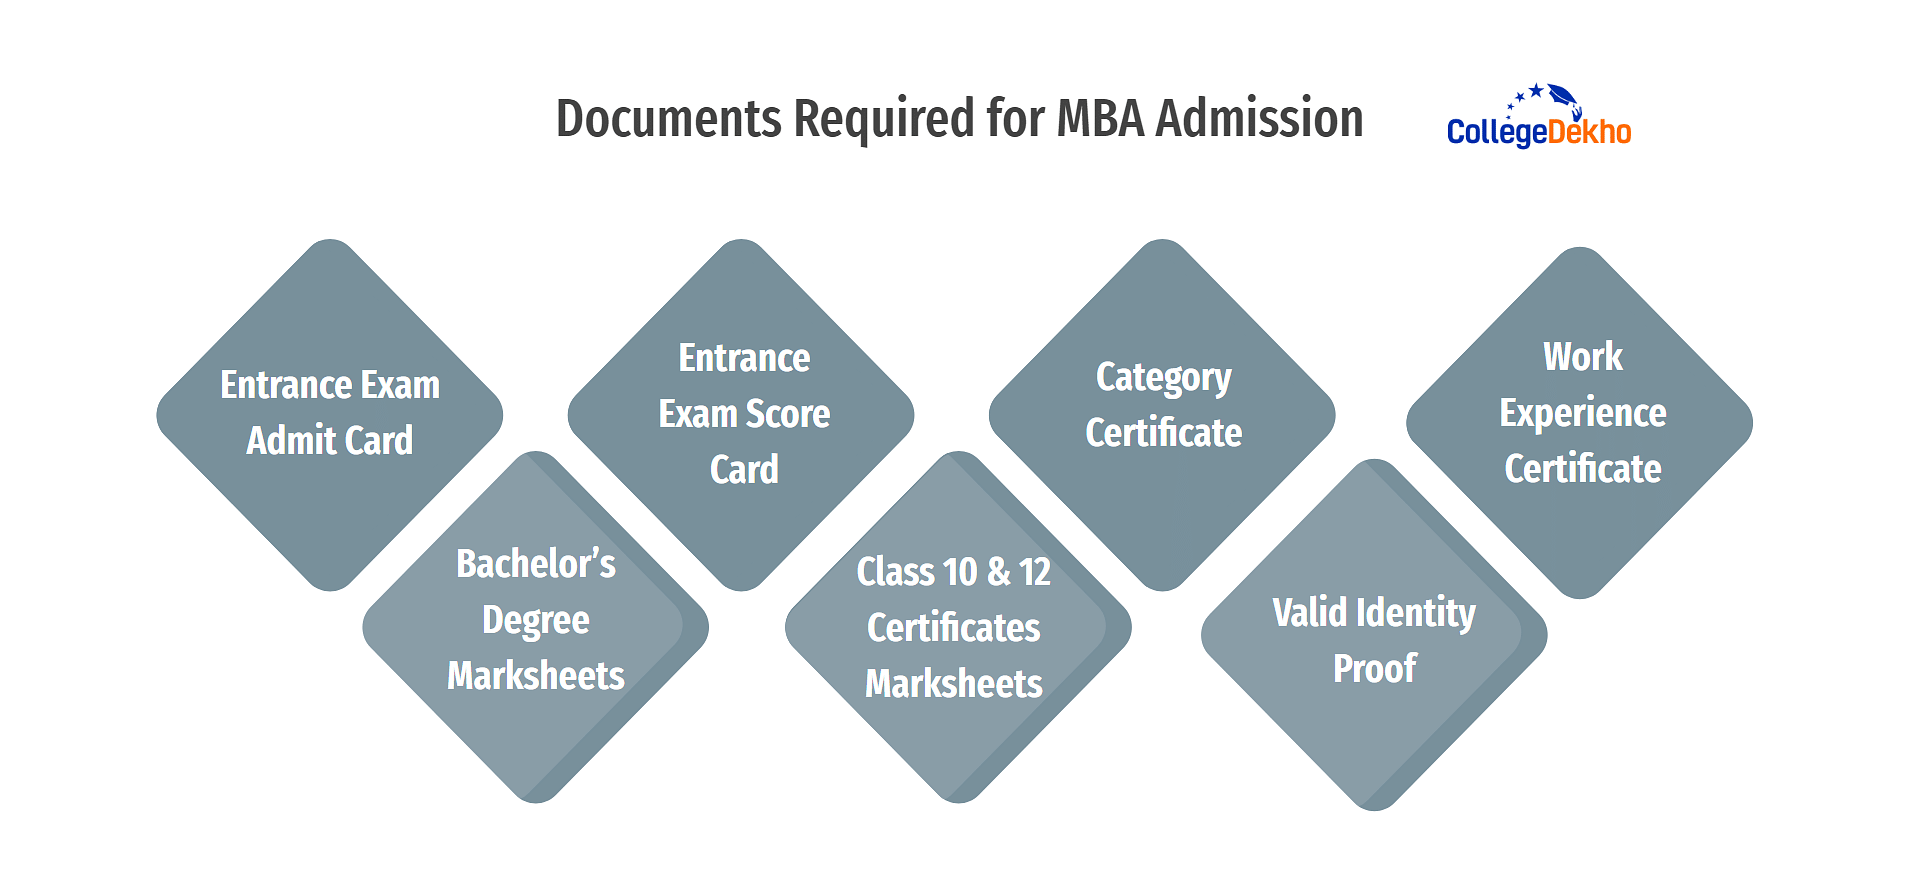 Documents Required for MBA Admission